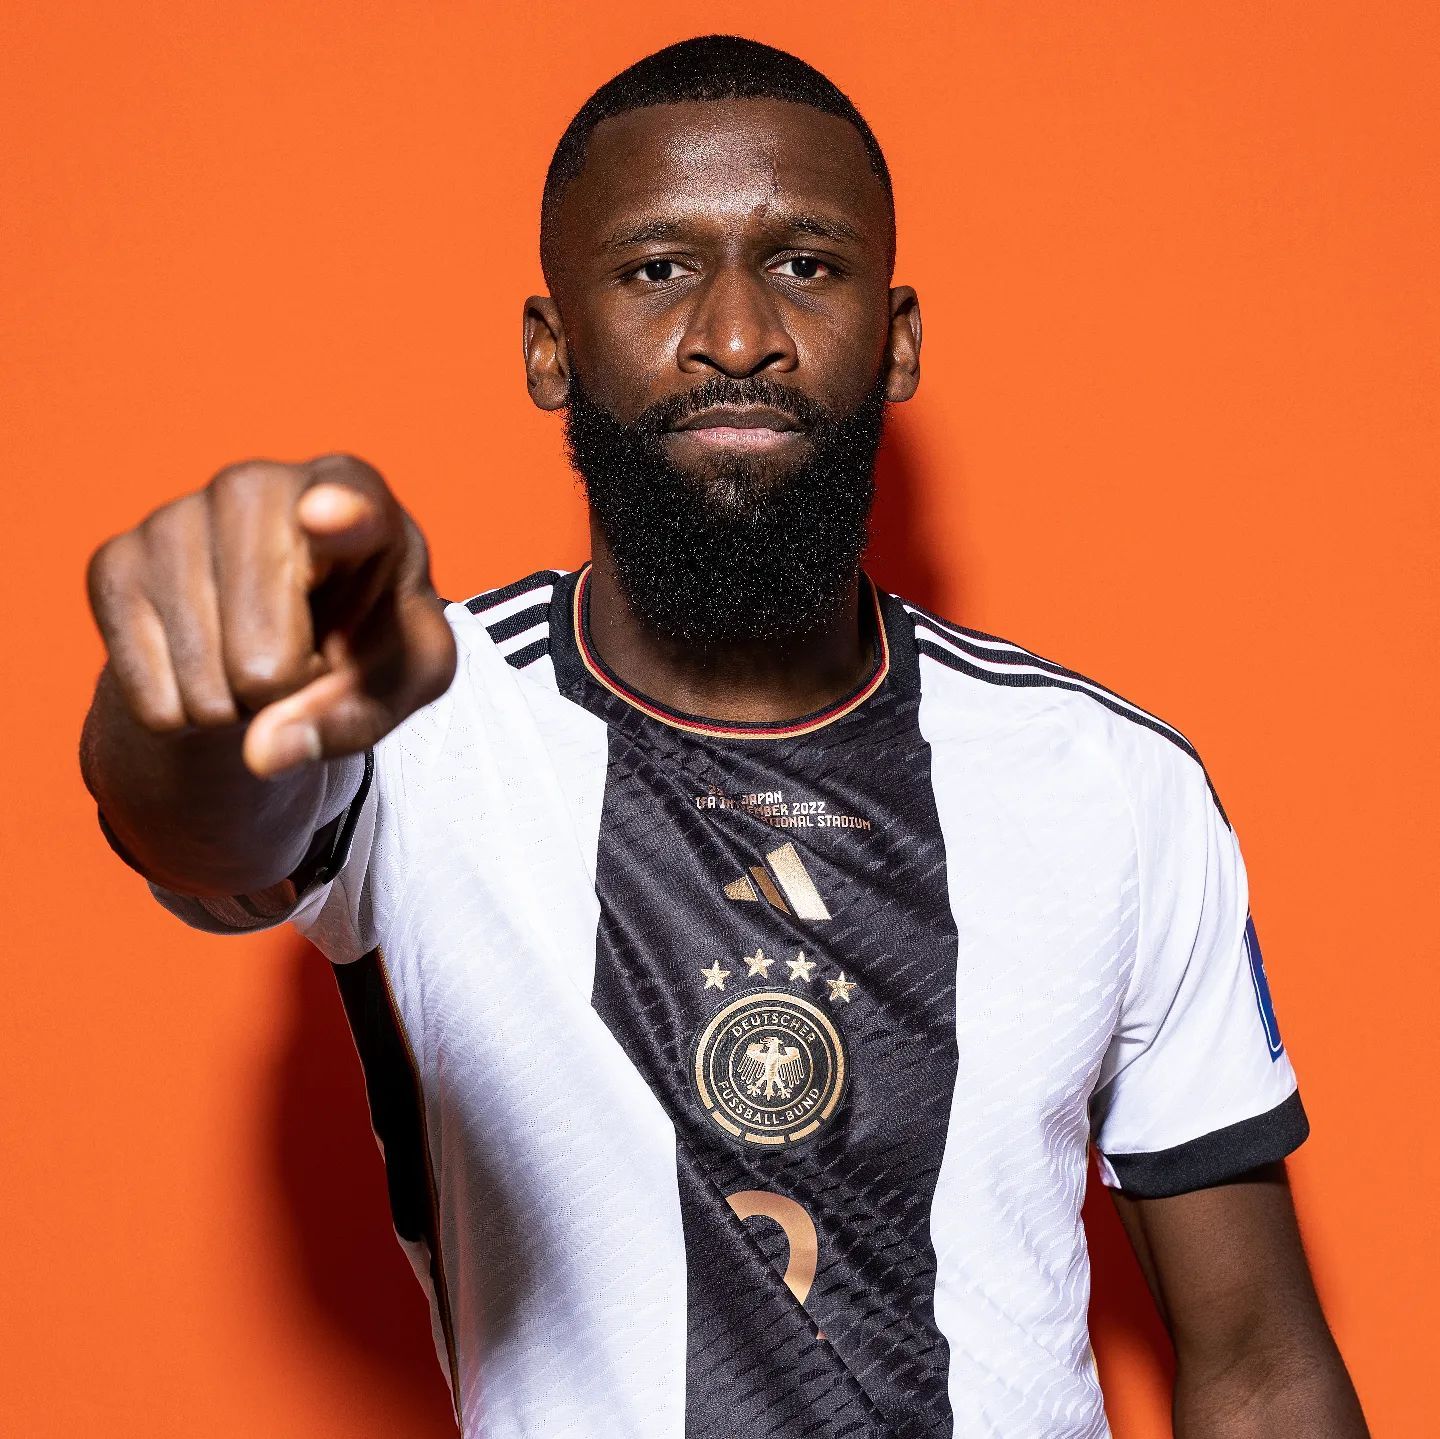 FIFA World Cup: Fans troll Germany’s Antonio Rudiger for animated celebration, goal vs Spain ruled off-side